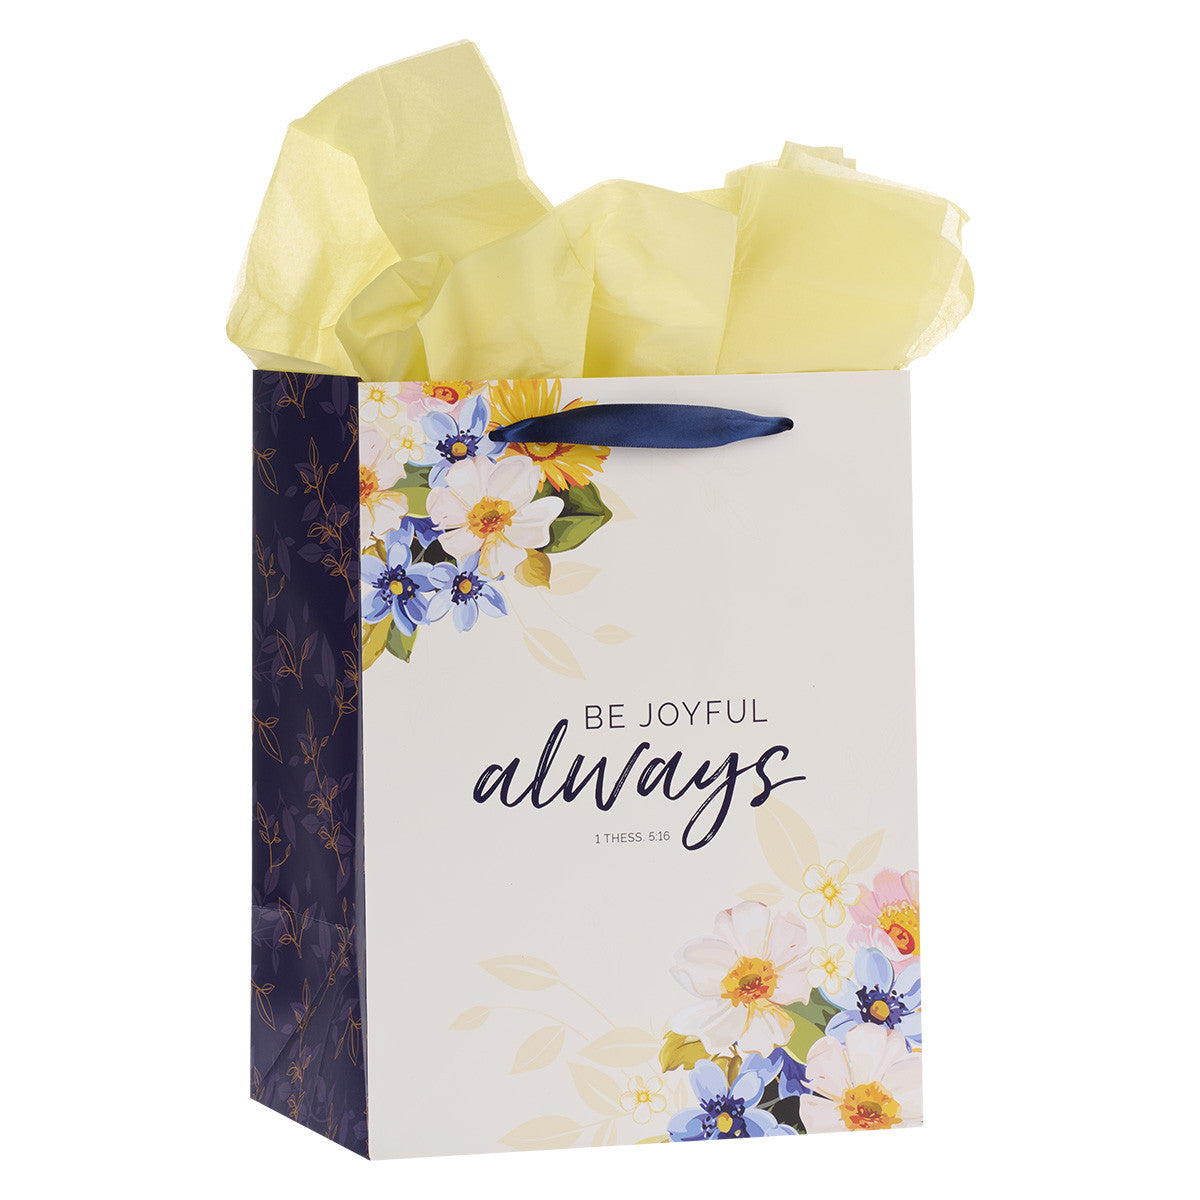 Be Joyful Always Yellow and Navy Blue Floral Portrait Gift Bag with Card Set – 1 Thessalonians 5:16 - The Christian Gift Company